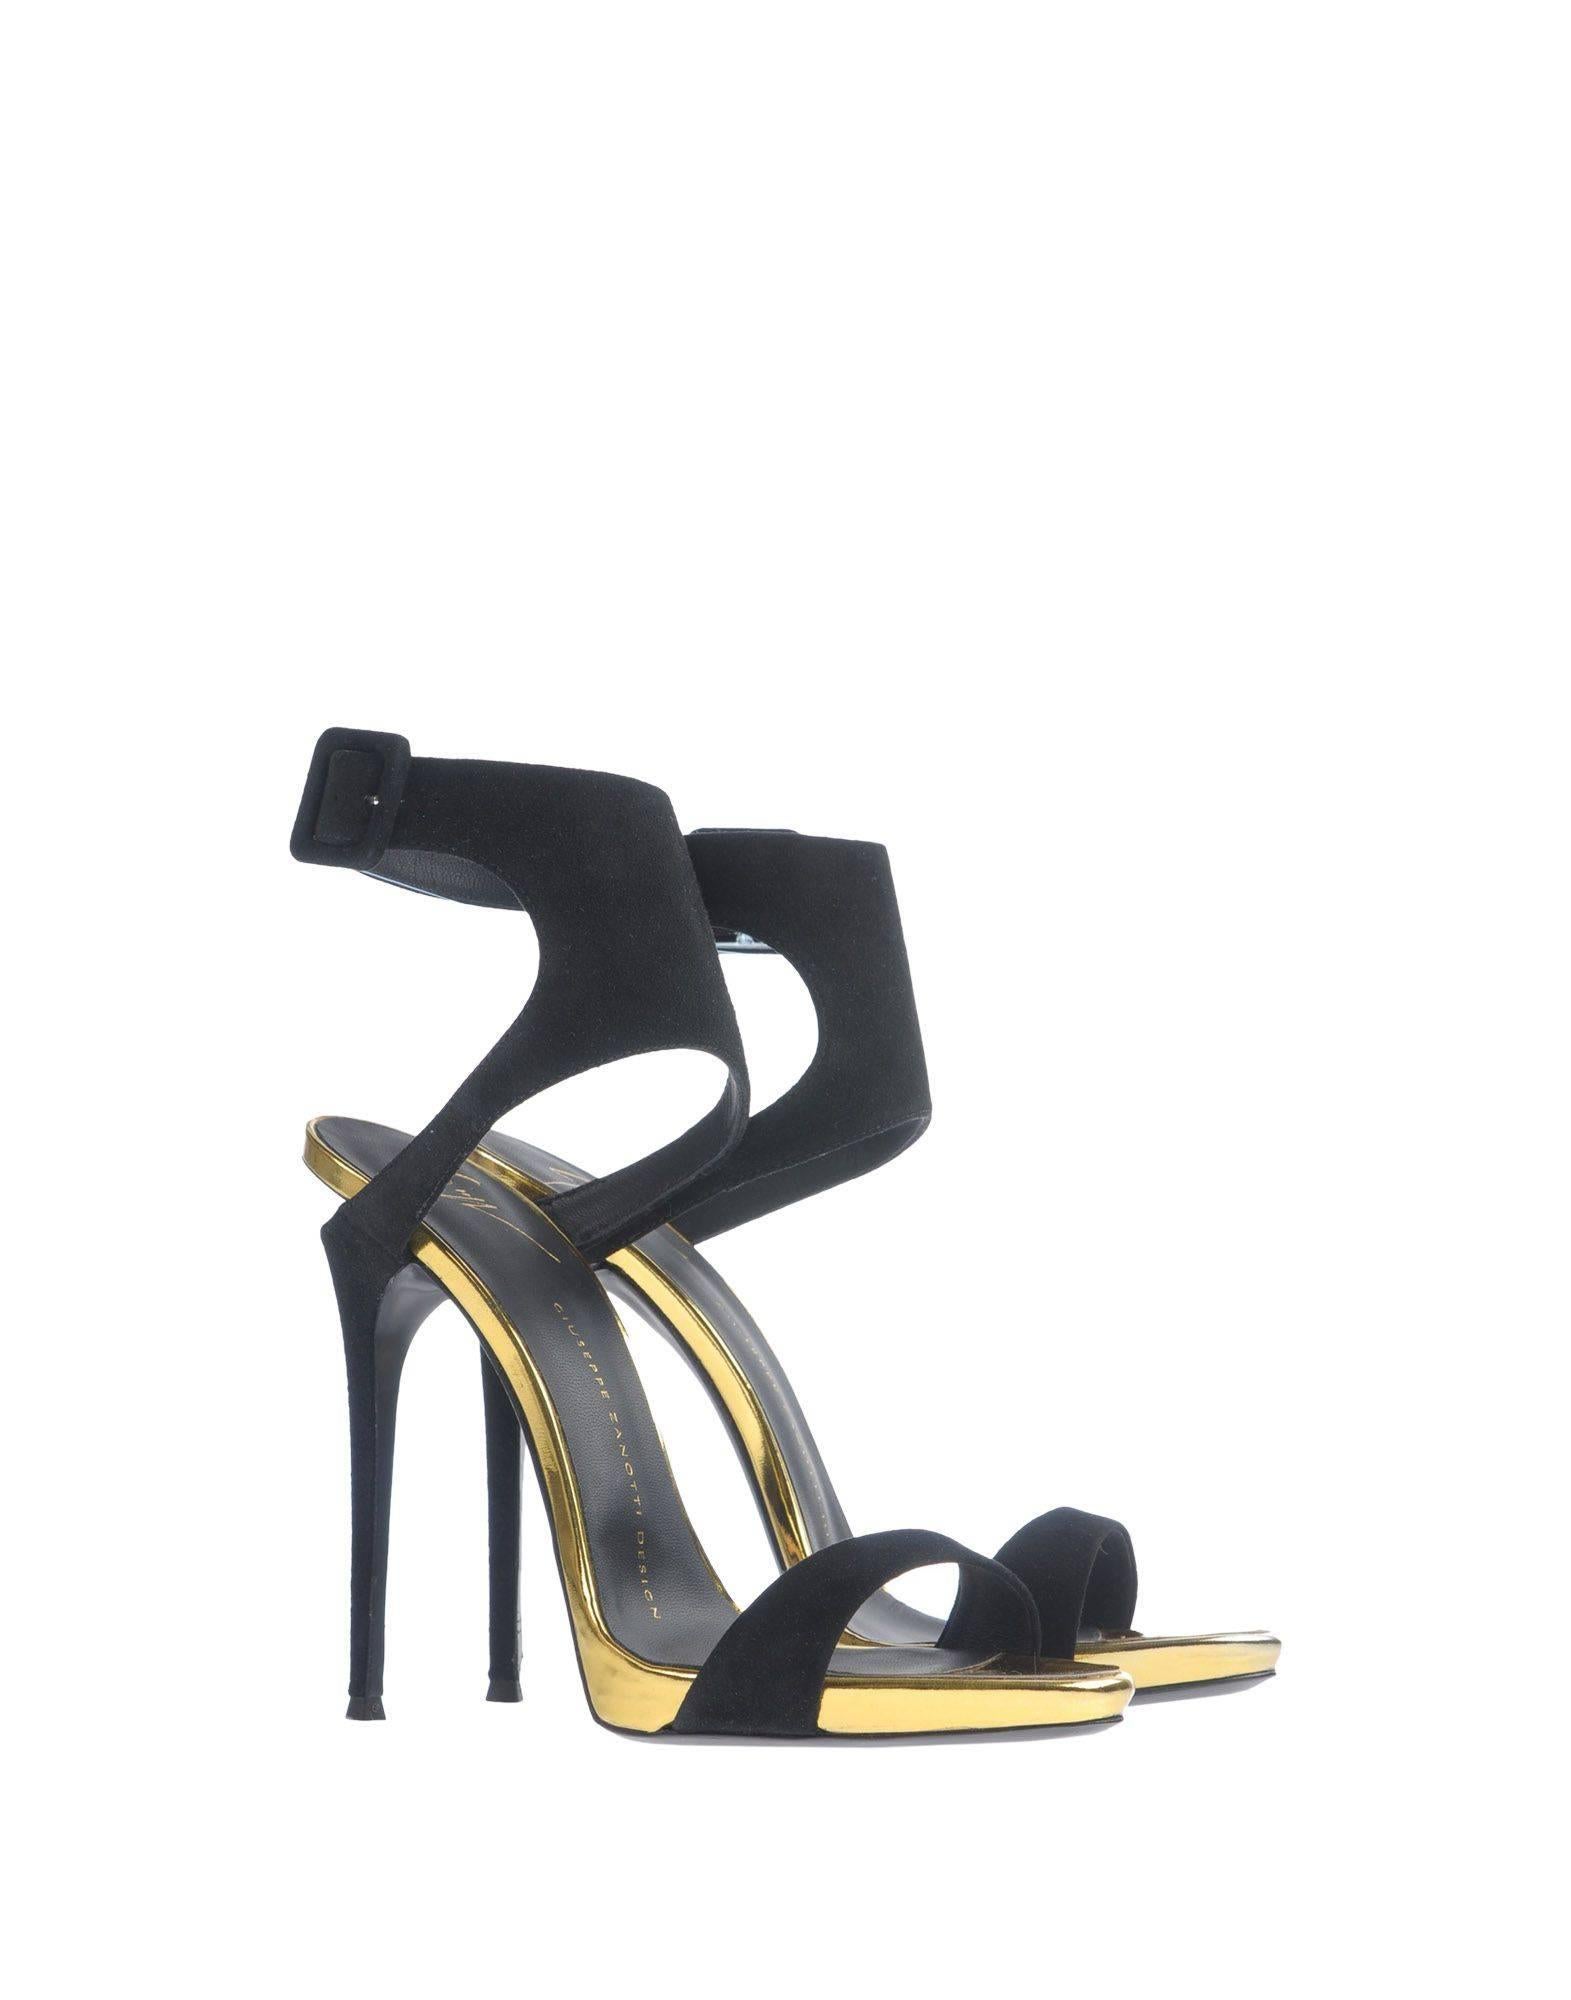 Giuseppe Zanotti New Black Suede Gold Evening Sandals Heels in Box

Size IT 36 
Suede
Leather
Ankle buckle closure
Made in Italy
Heel height 4.75"
Includes original Giuseppe Zanotti box